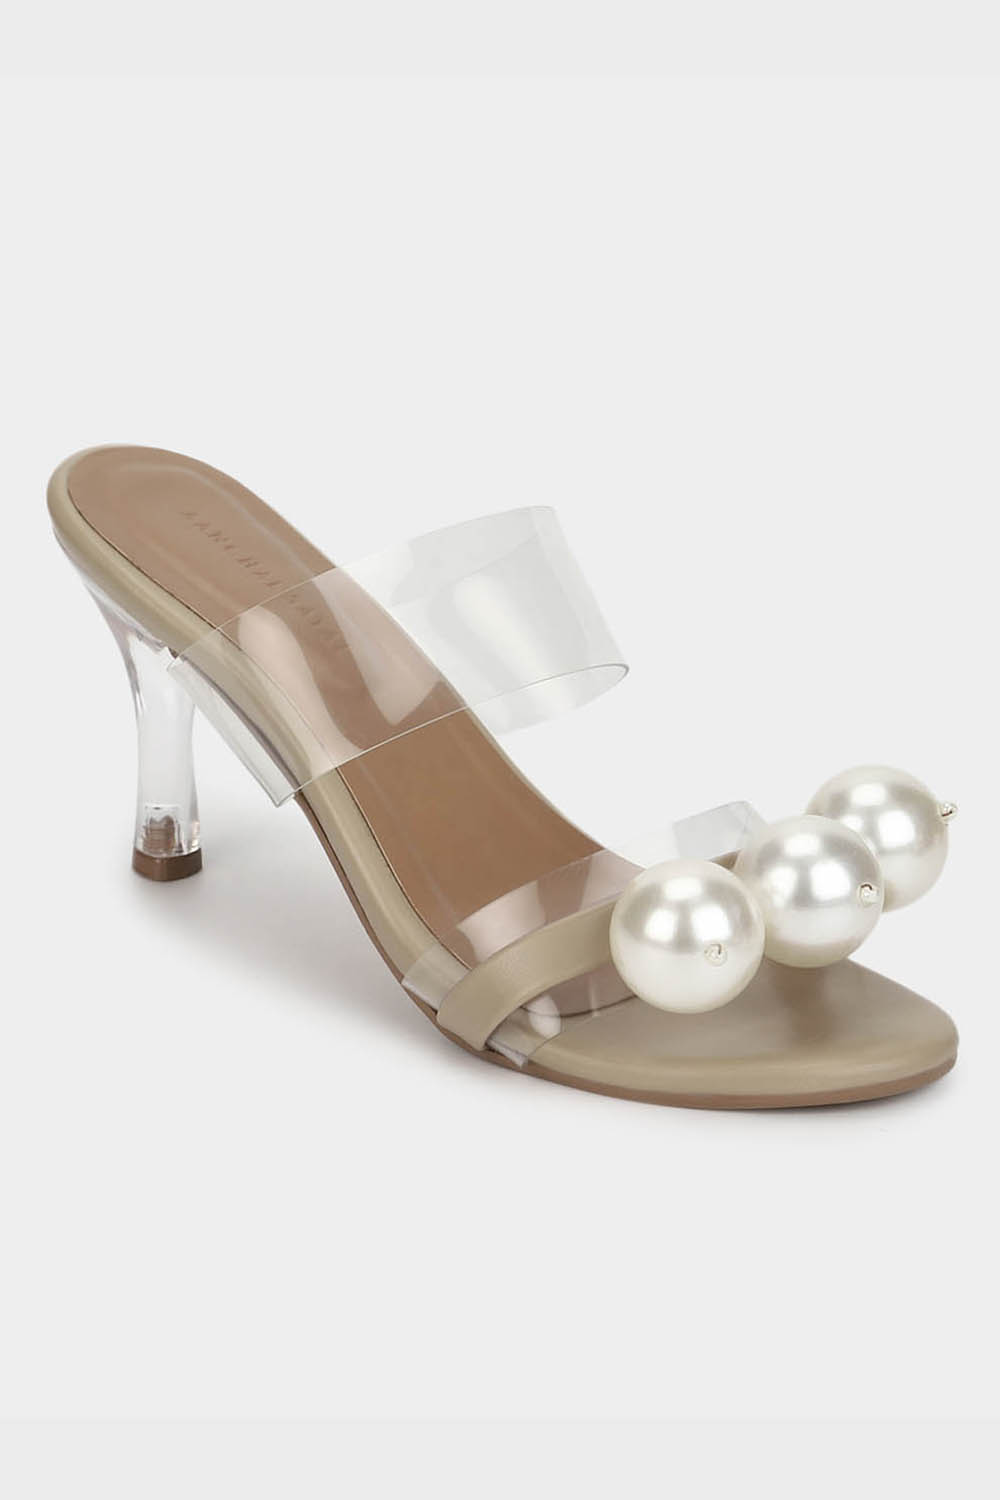 Peach Shoes Catwalk - Buy Peach Shoes Catwalk online in India